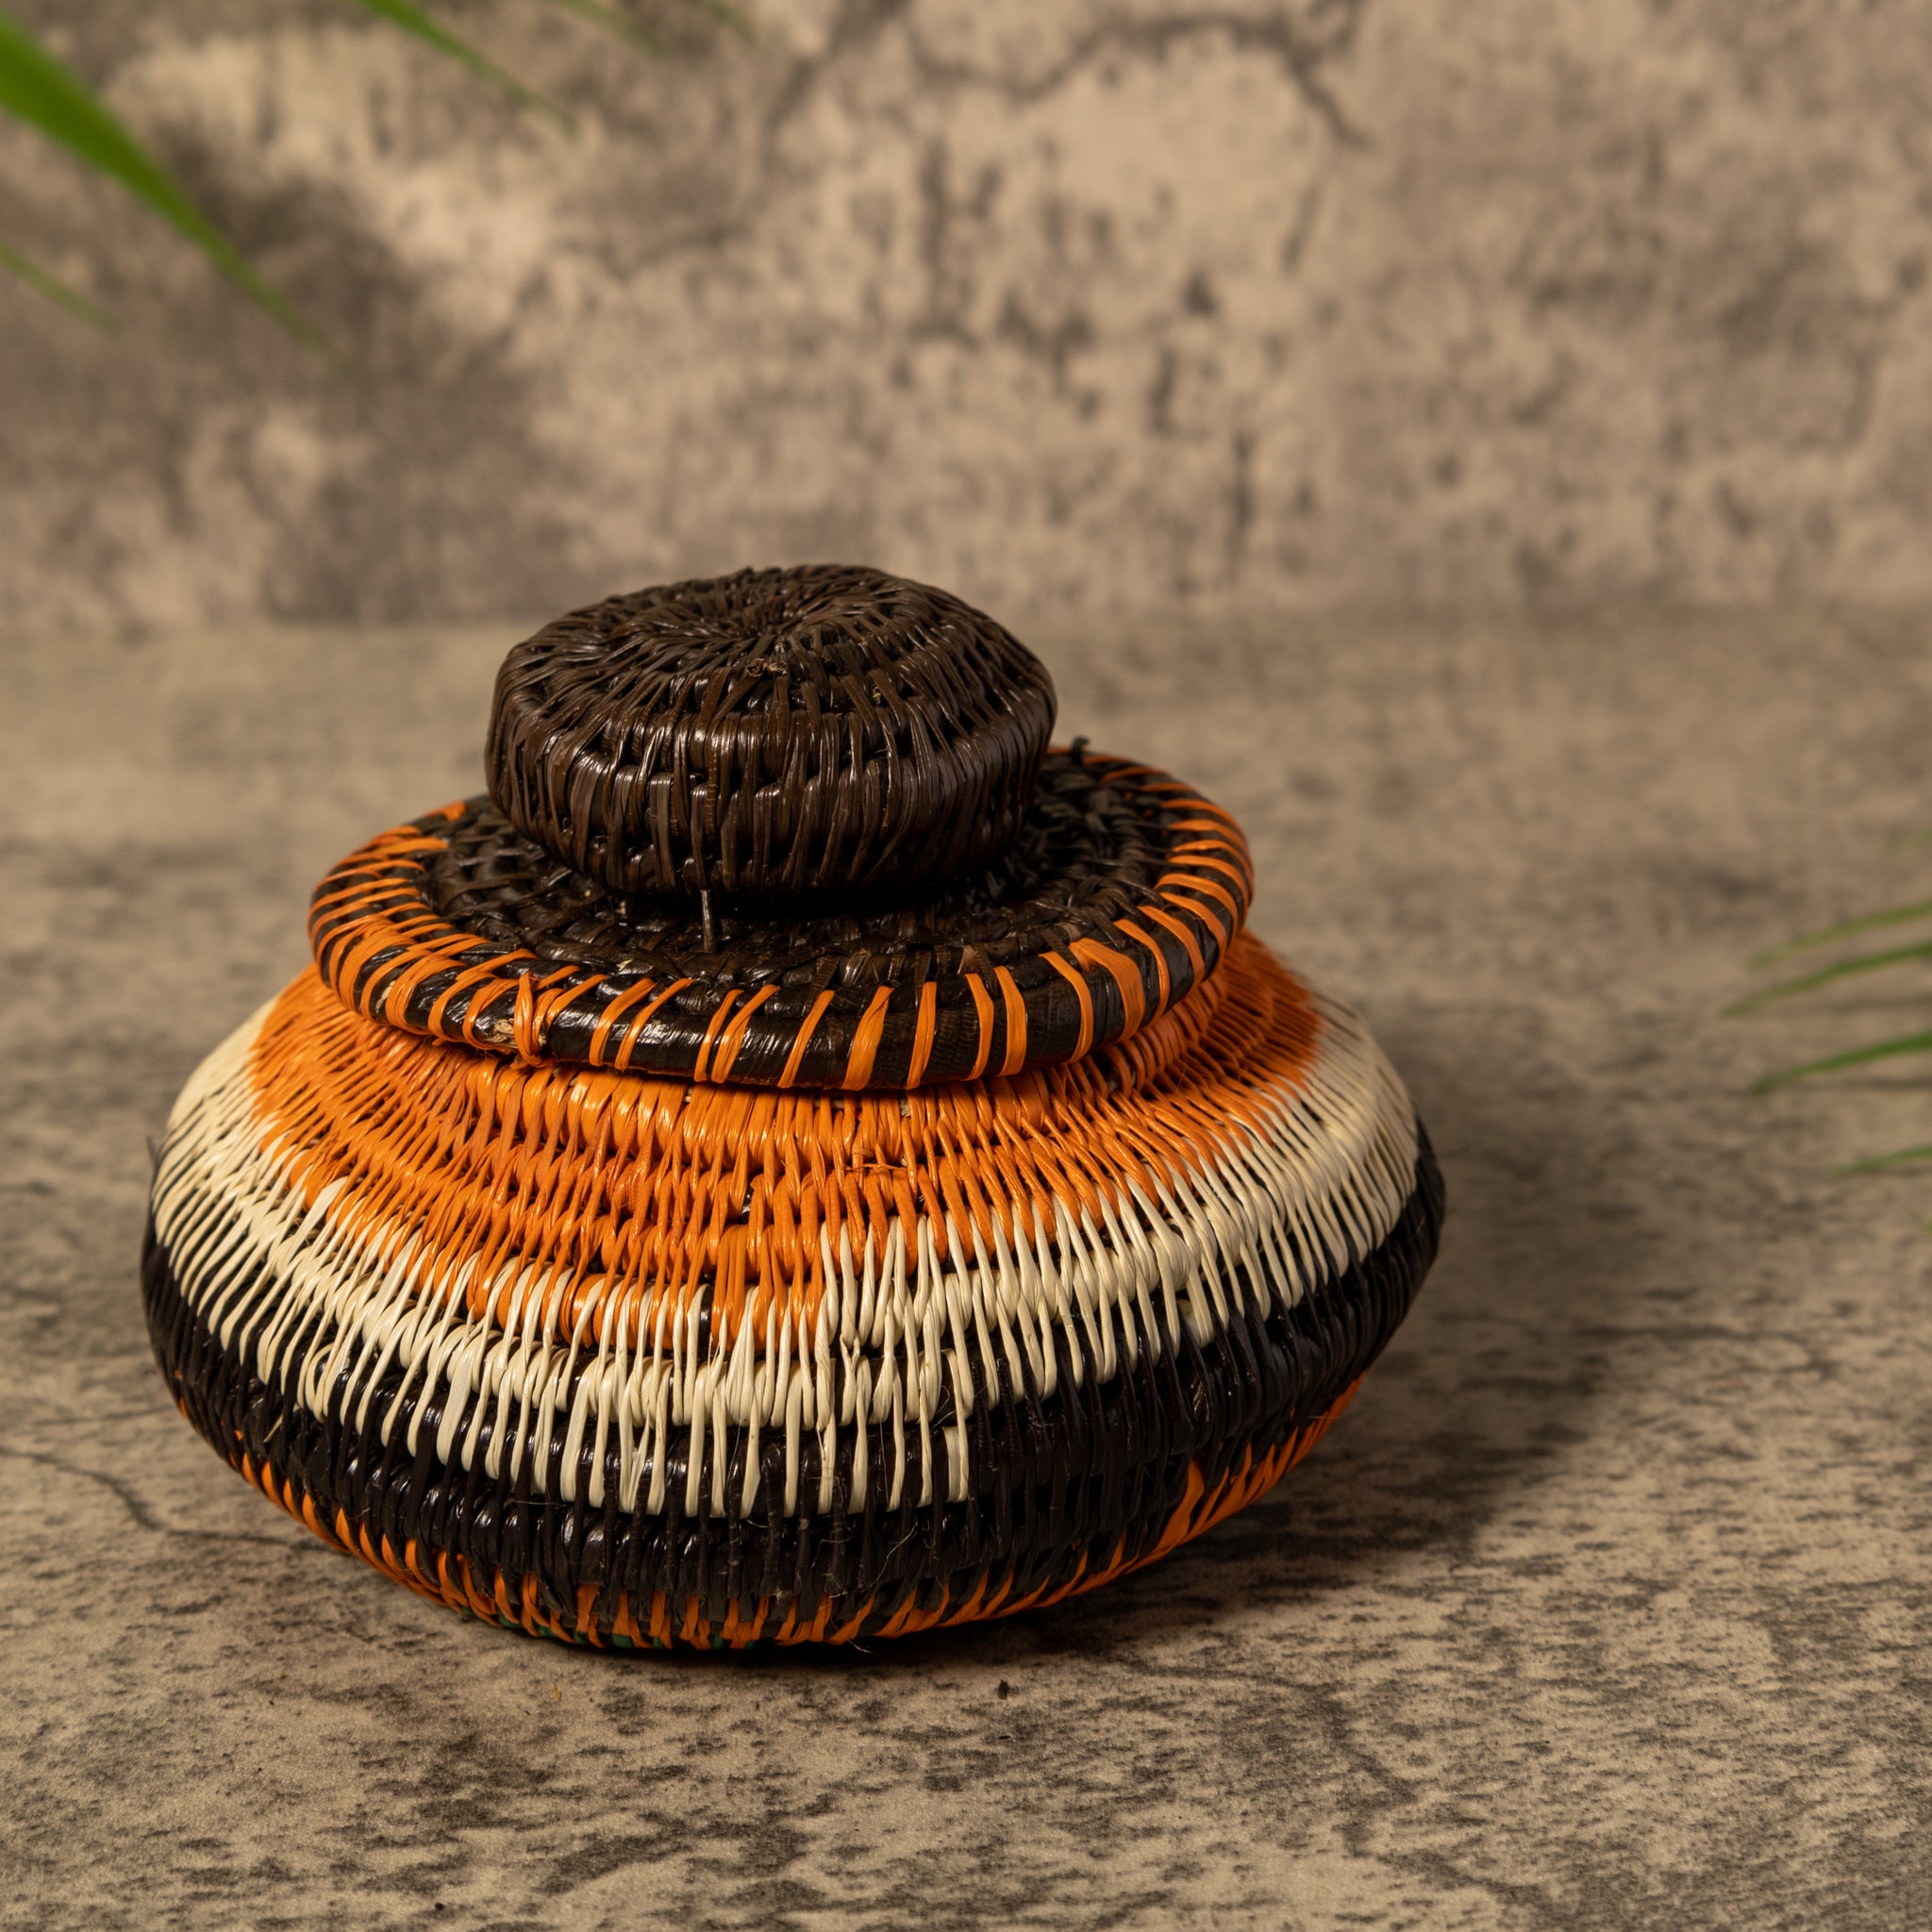 Orange Brown And Green Rainforest Basket With Top